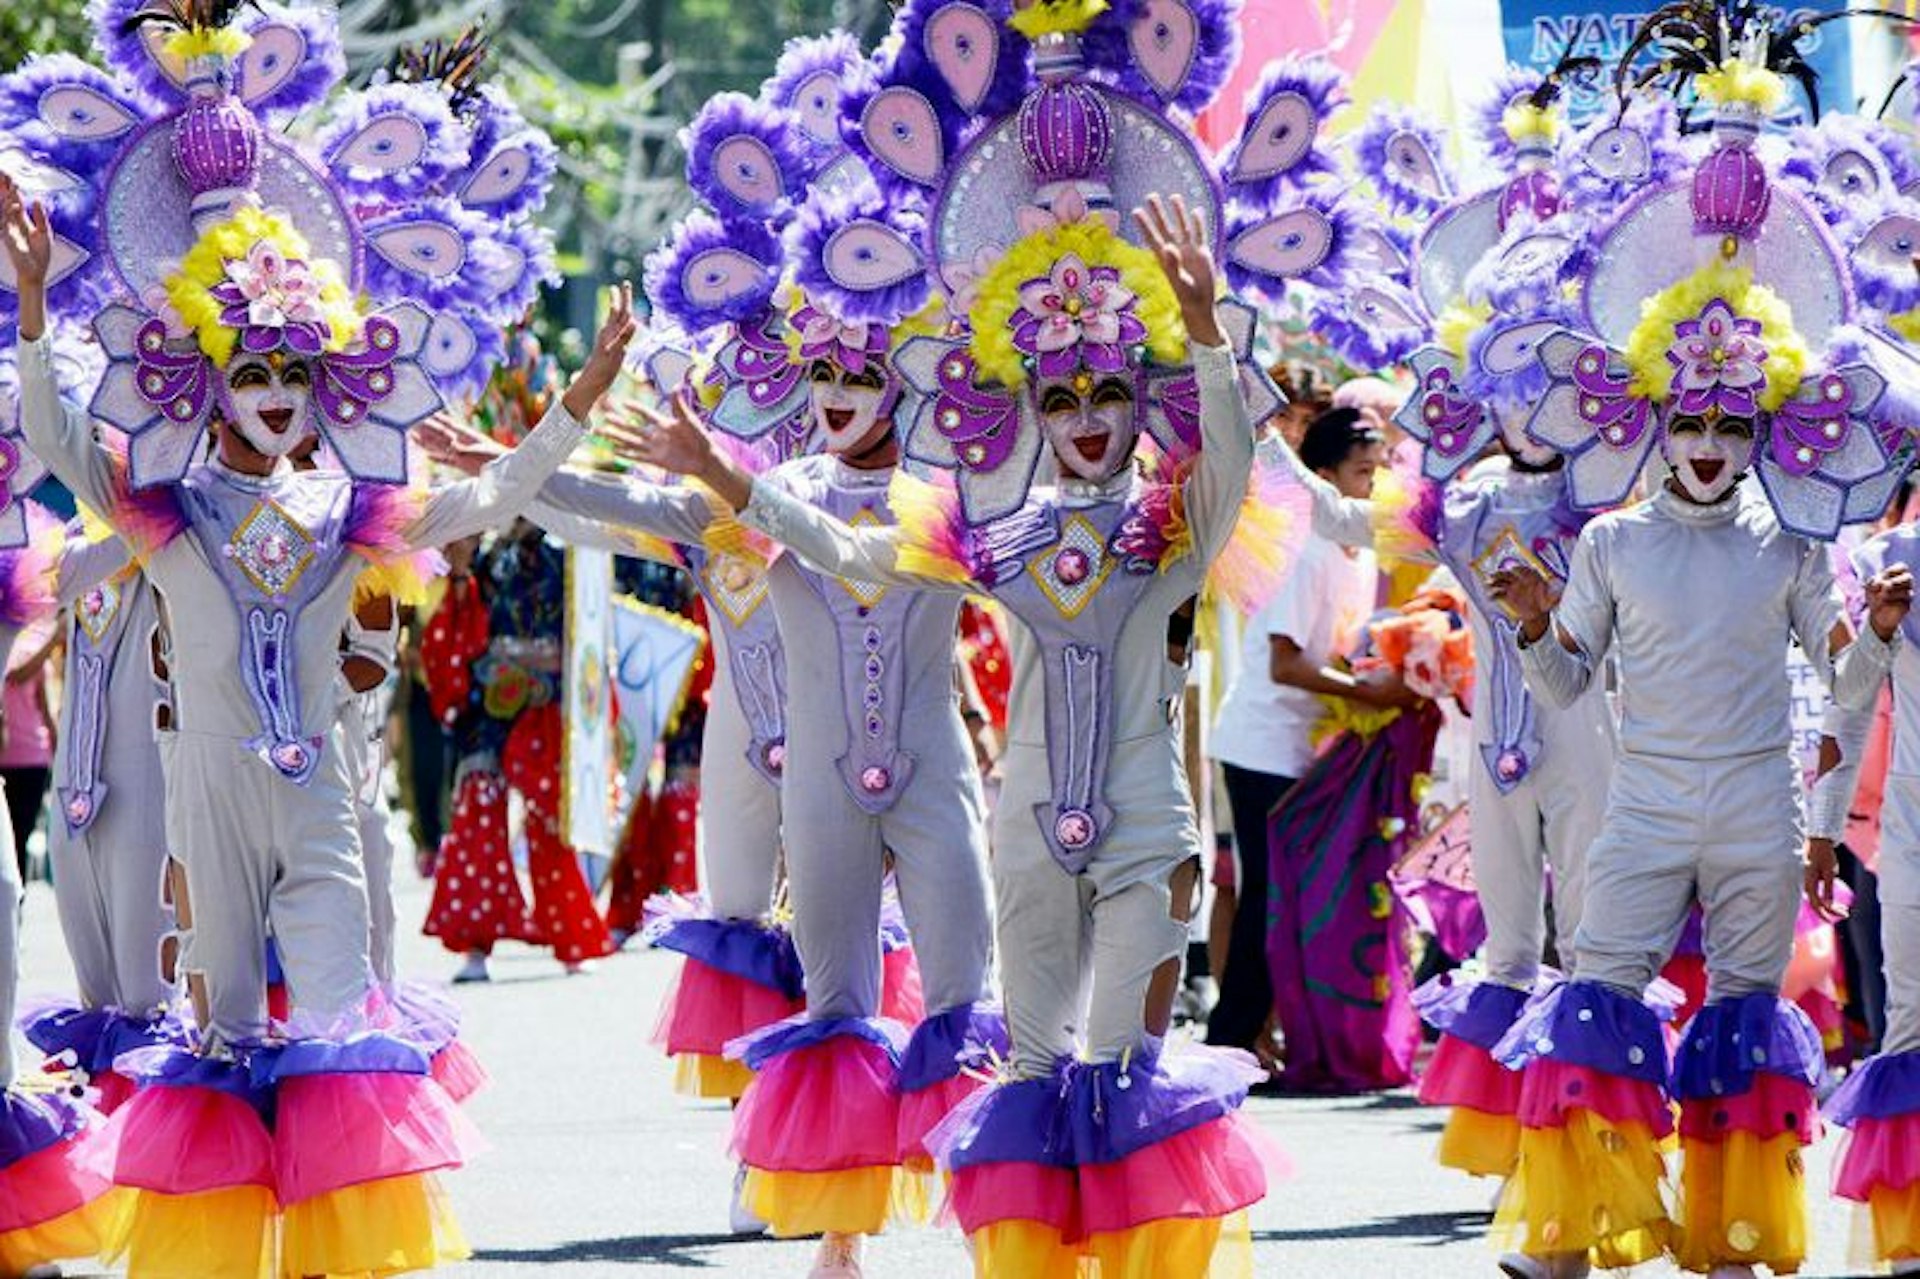 Dancers and performers decked in flamboyant outfits and smiling masks take to the streets for Masskara Festival in the Philippines. 